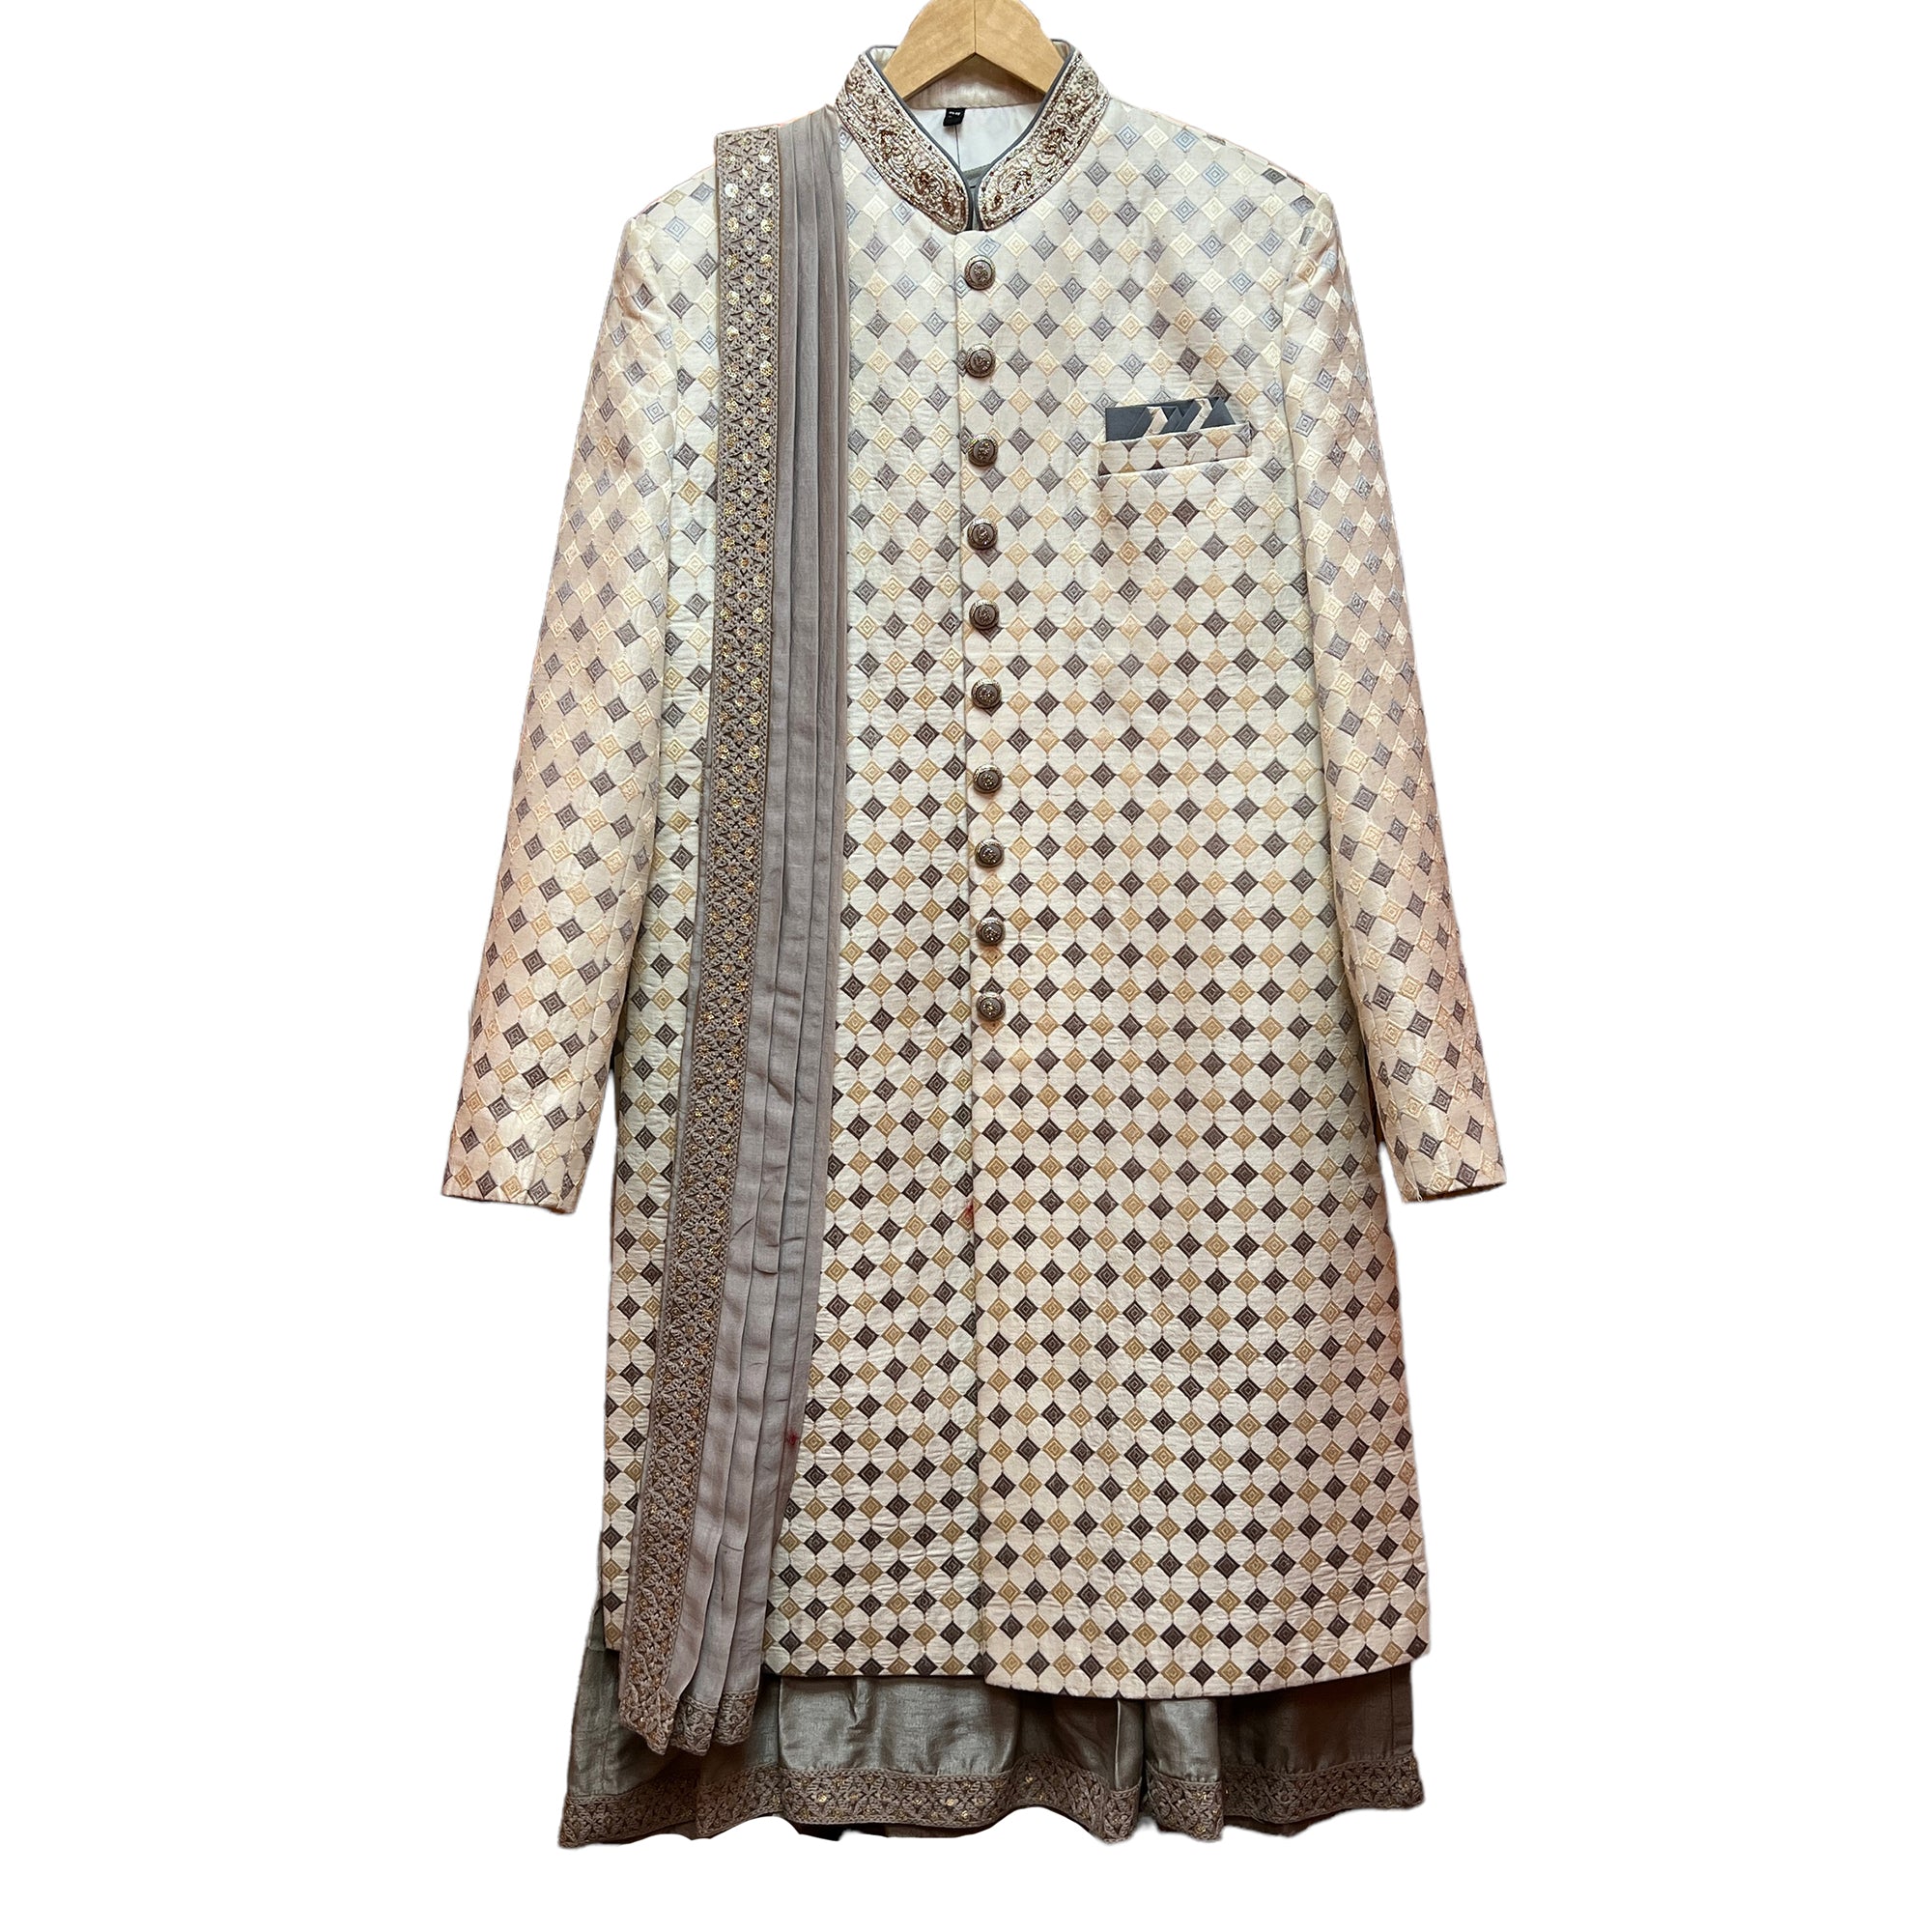 Silver & Gold Embroidered Sherwani - Vintage India NYC